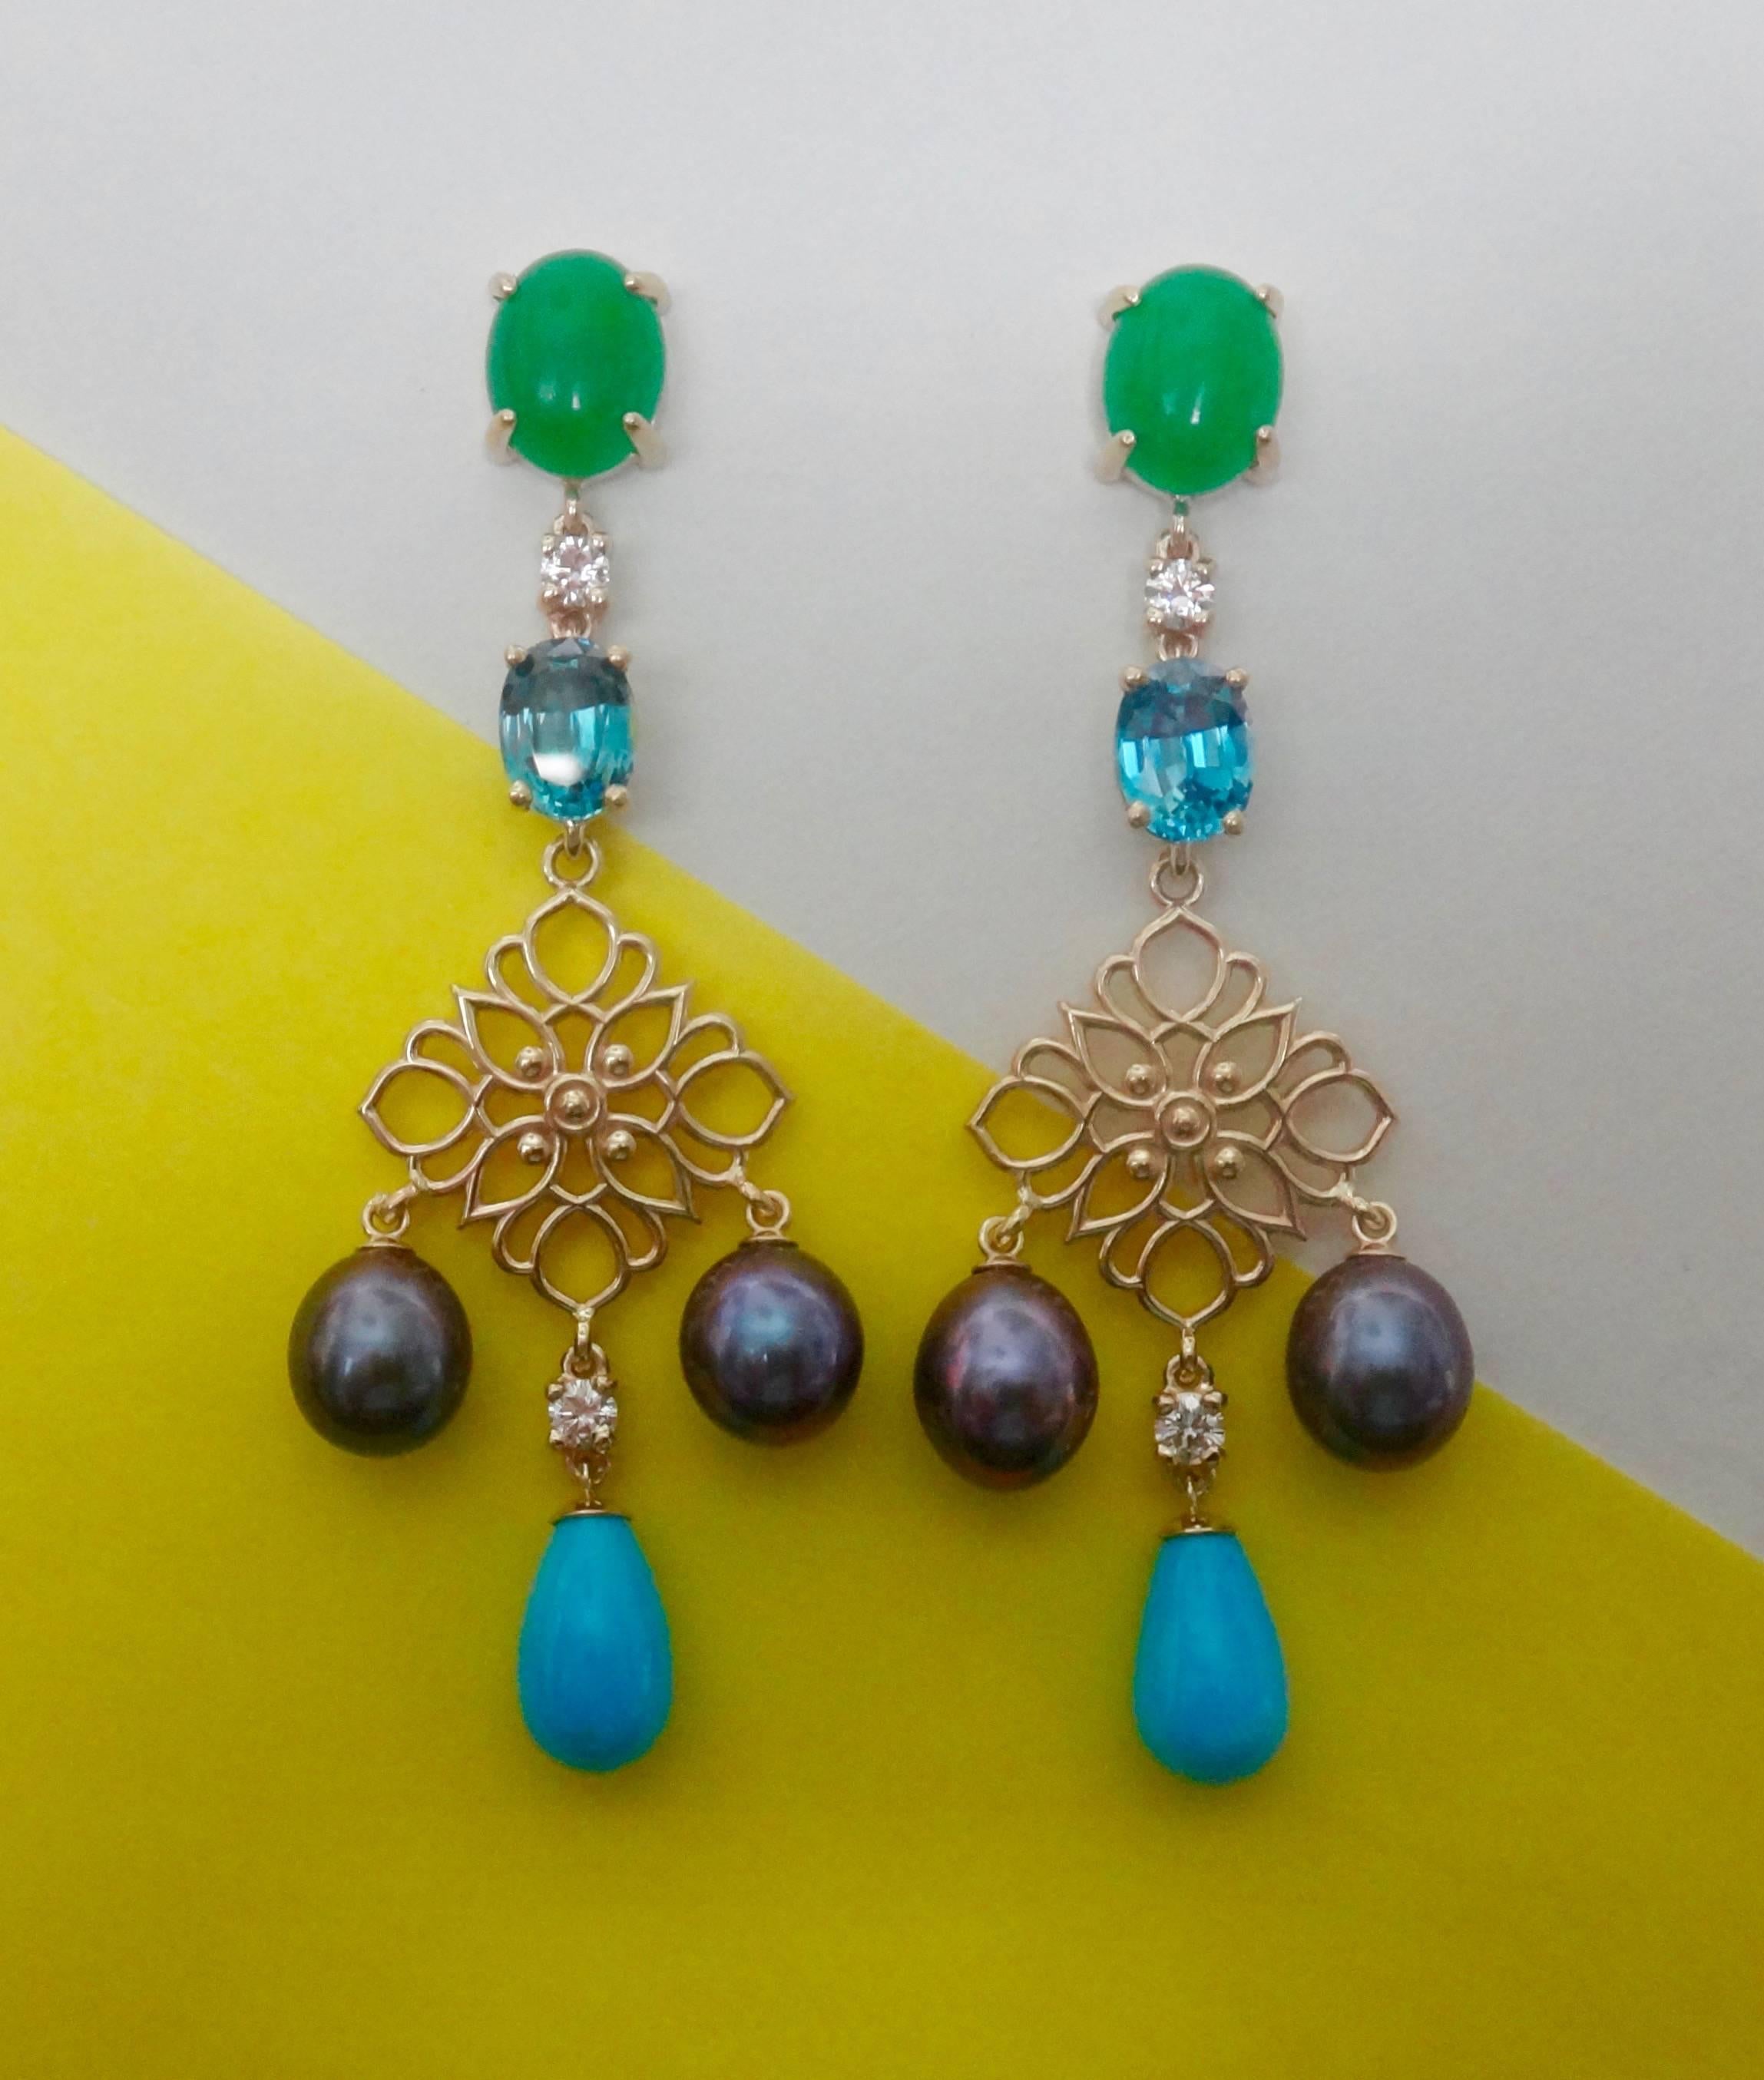 A pair of brilliant, apple green chrysoprase are combined with oval, faceted blue zircons (Origin: Sri Lanka) , brilliant cut white diamonds, black cultured pearls and Sleeping Beauty turquoise drops in these dramatic filigree dangle earrings. 